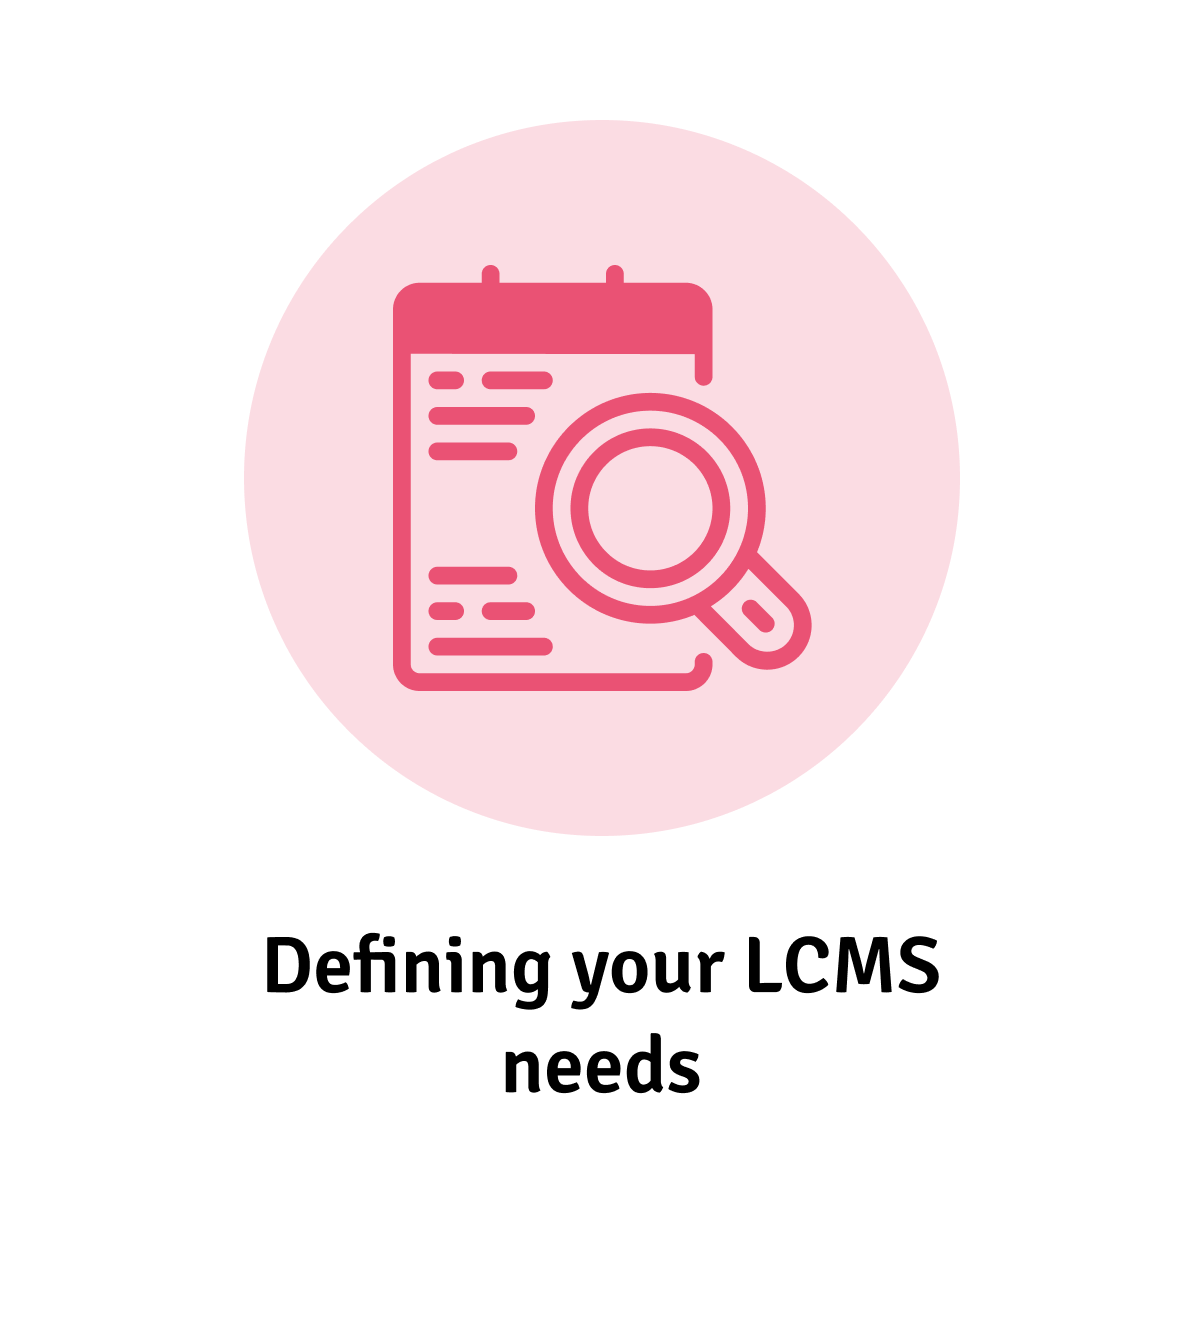 LCMS feature checklist